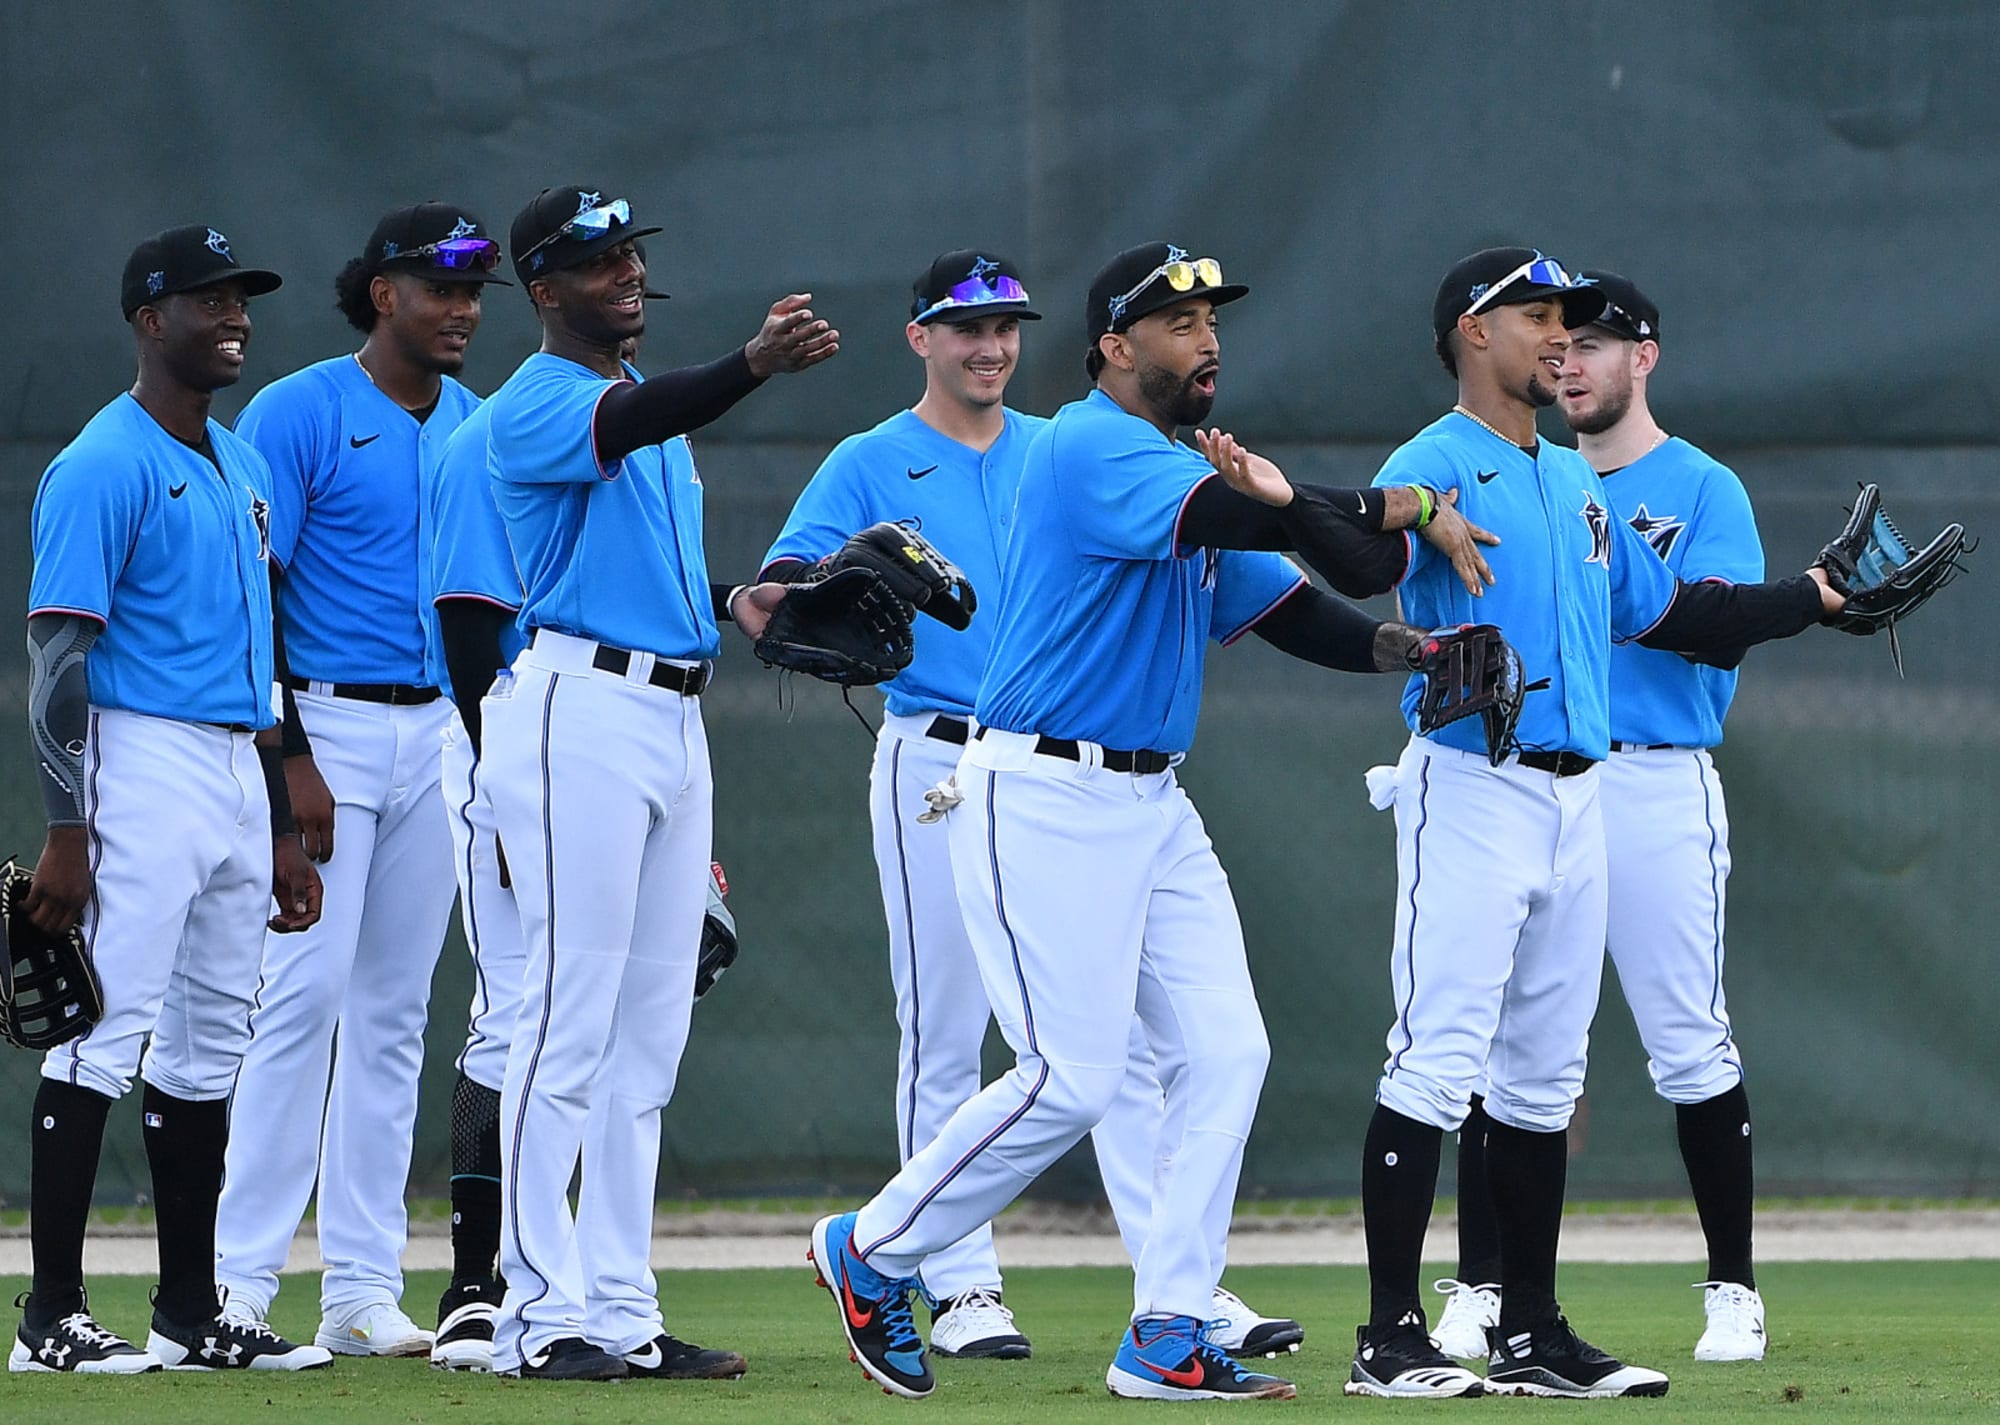 Miami marlins single a team roster